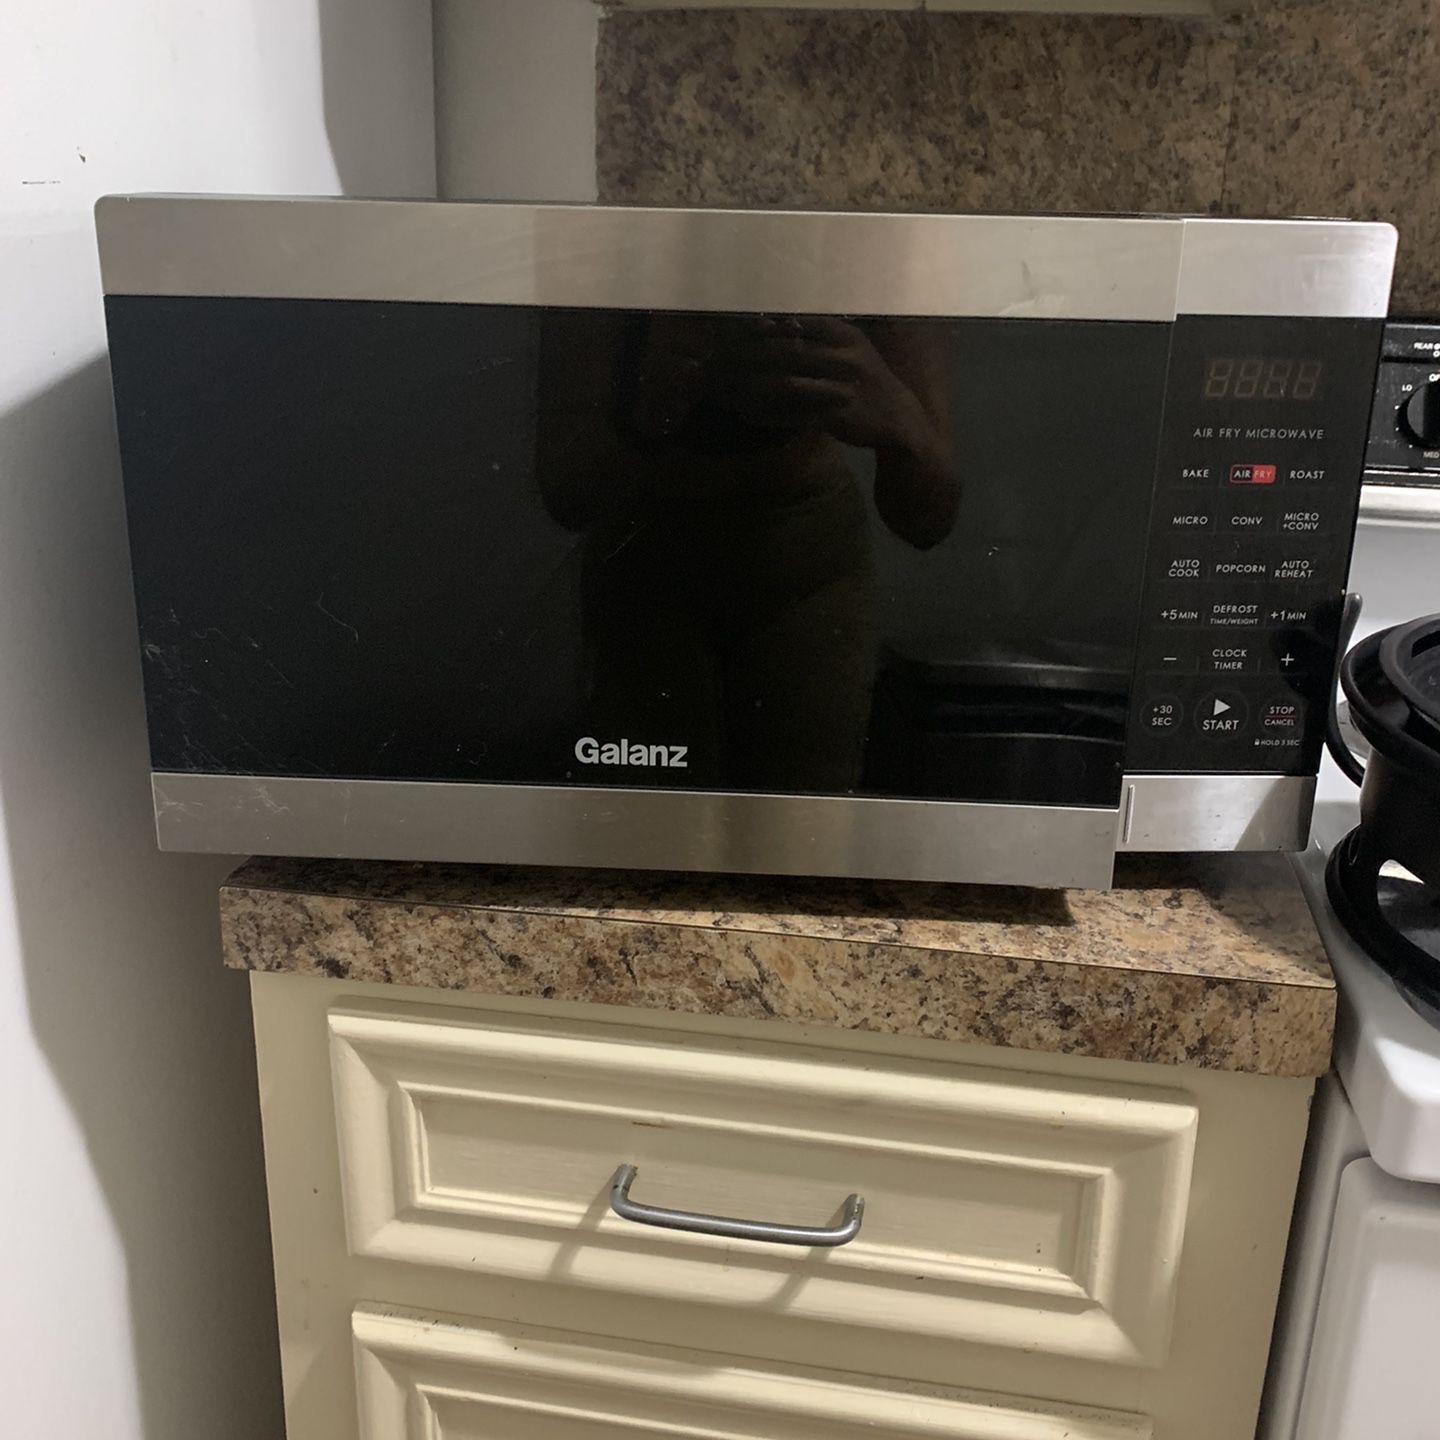 Galanz Air Fryer Microwave Combo for Sale in Virginia Beach, VA - OfferUp